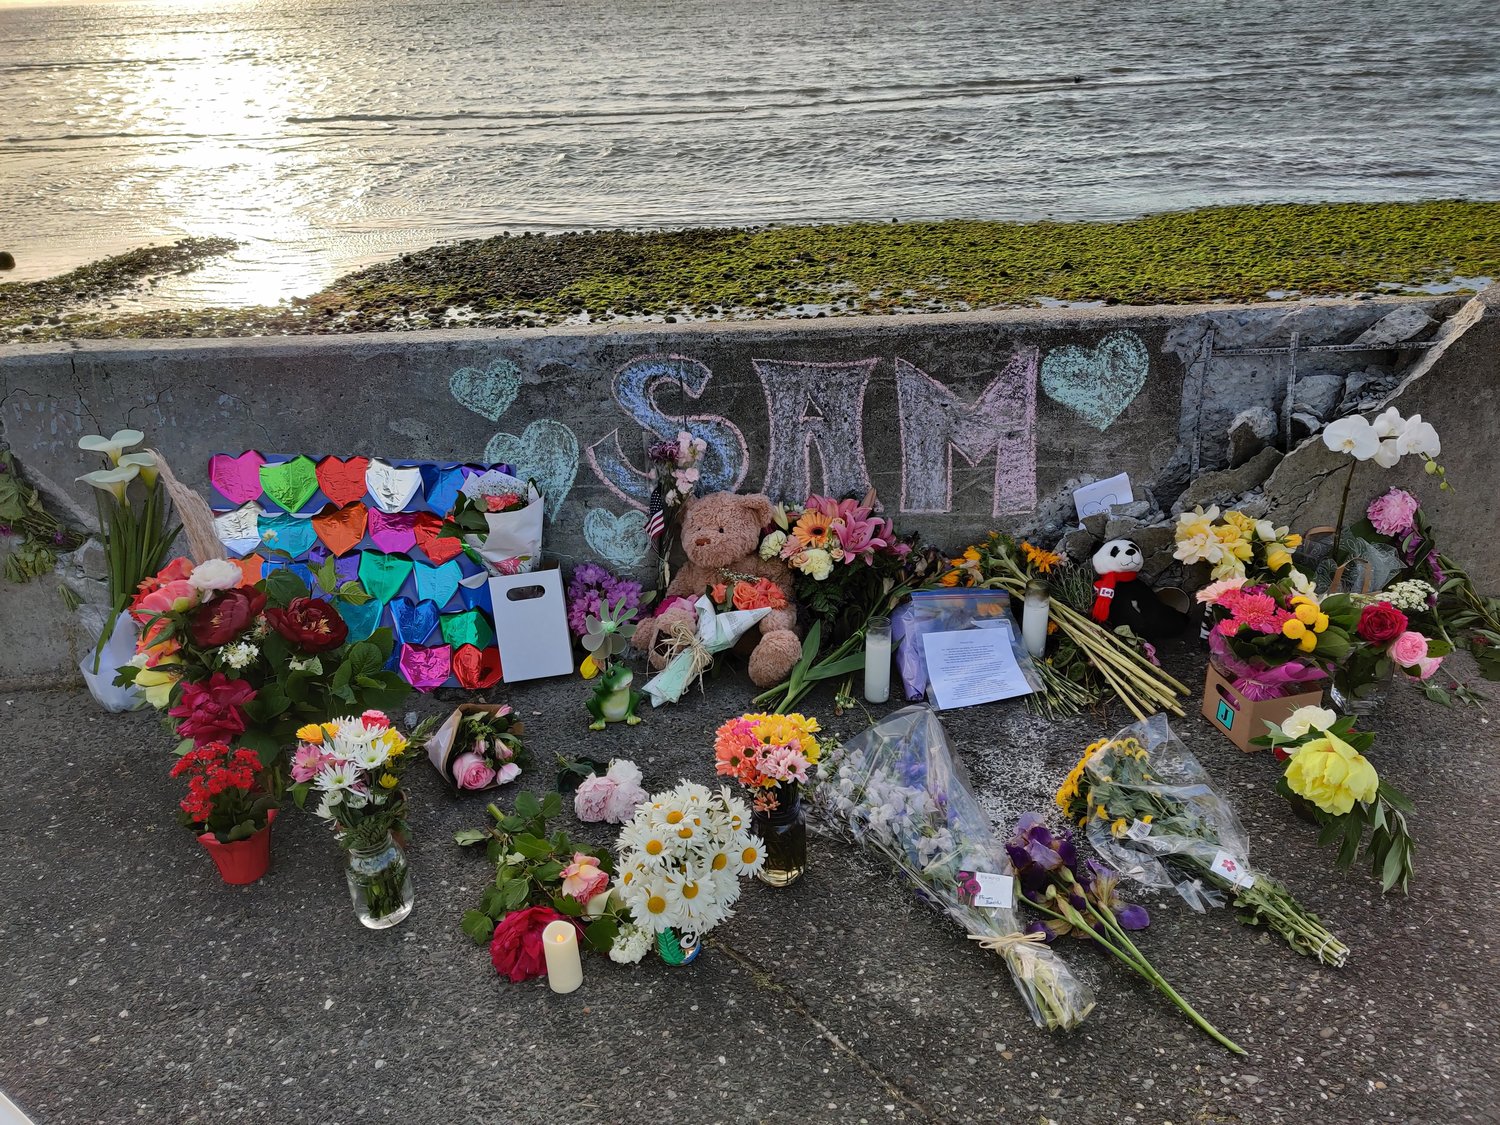 A memorial wall was set up following the fatal accident at the Maple Beach sea wall.